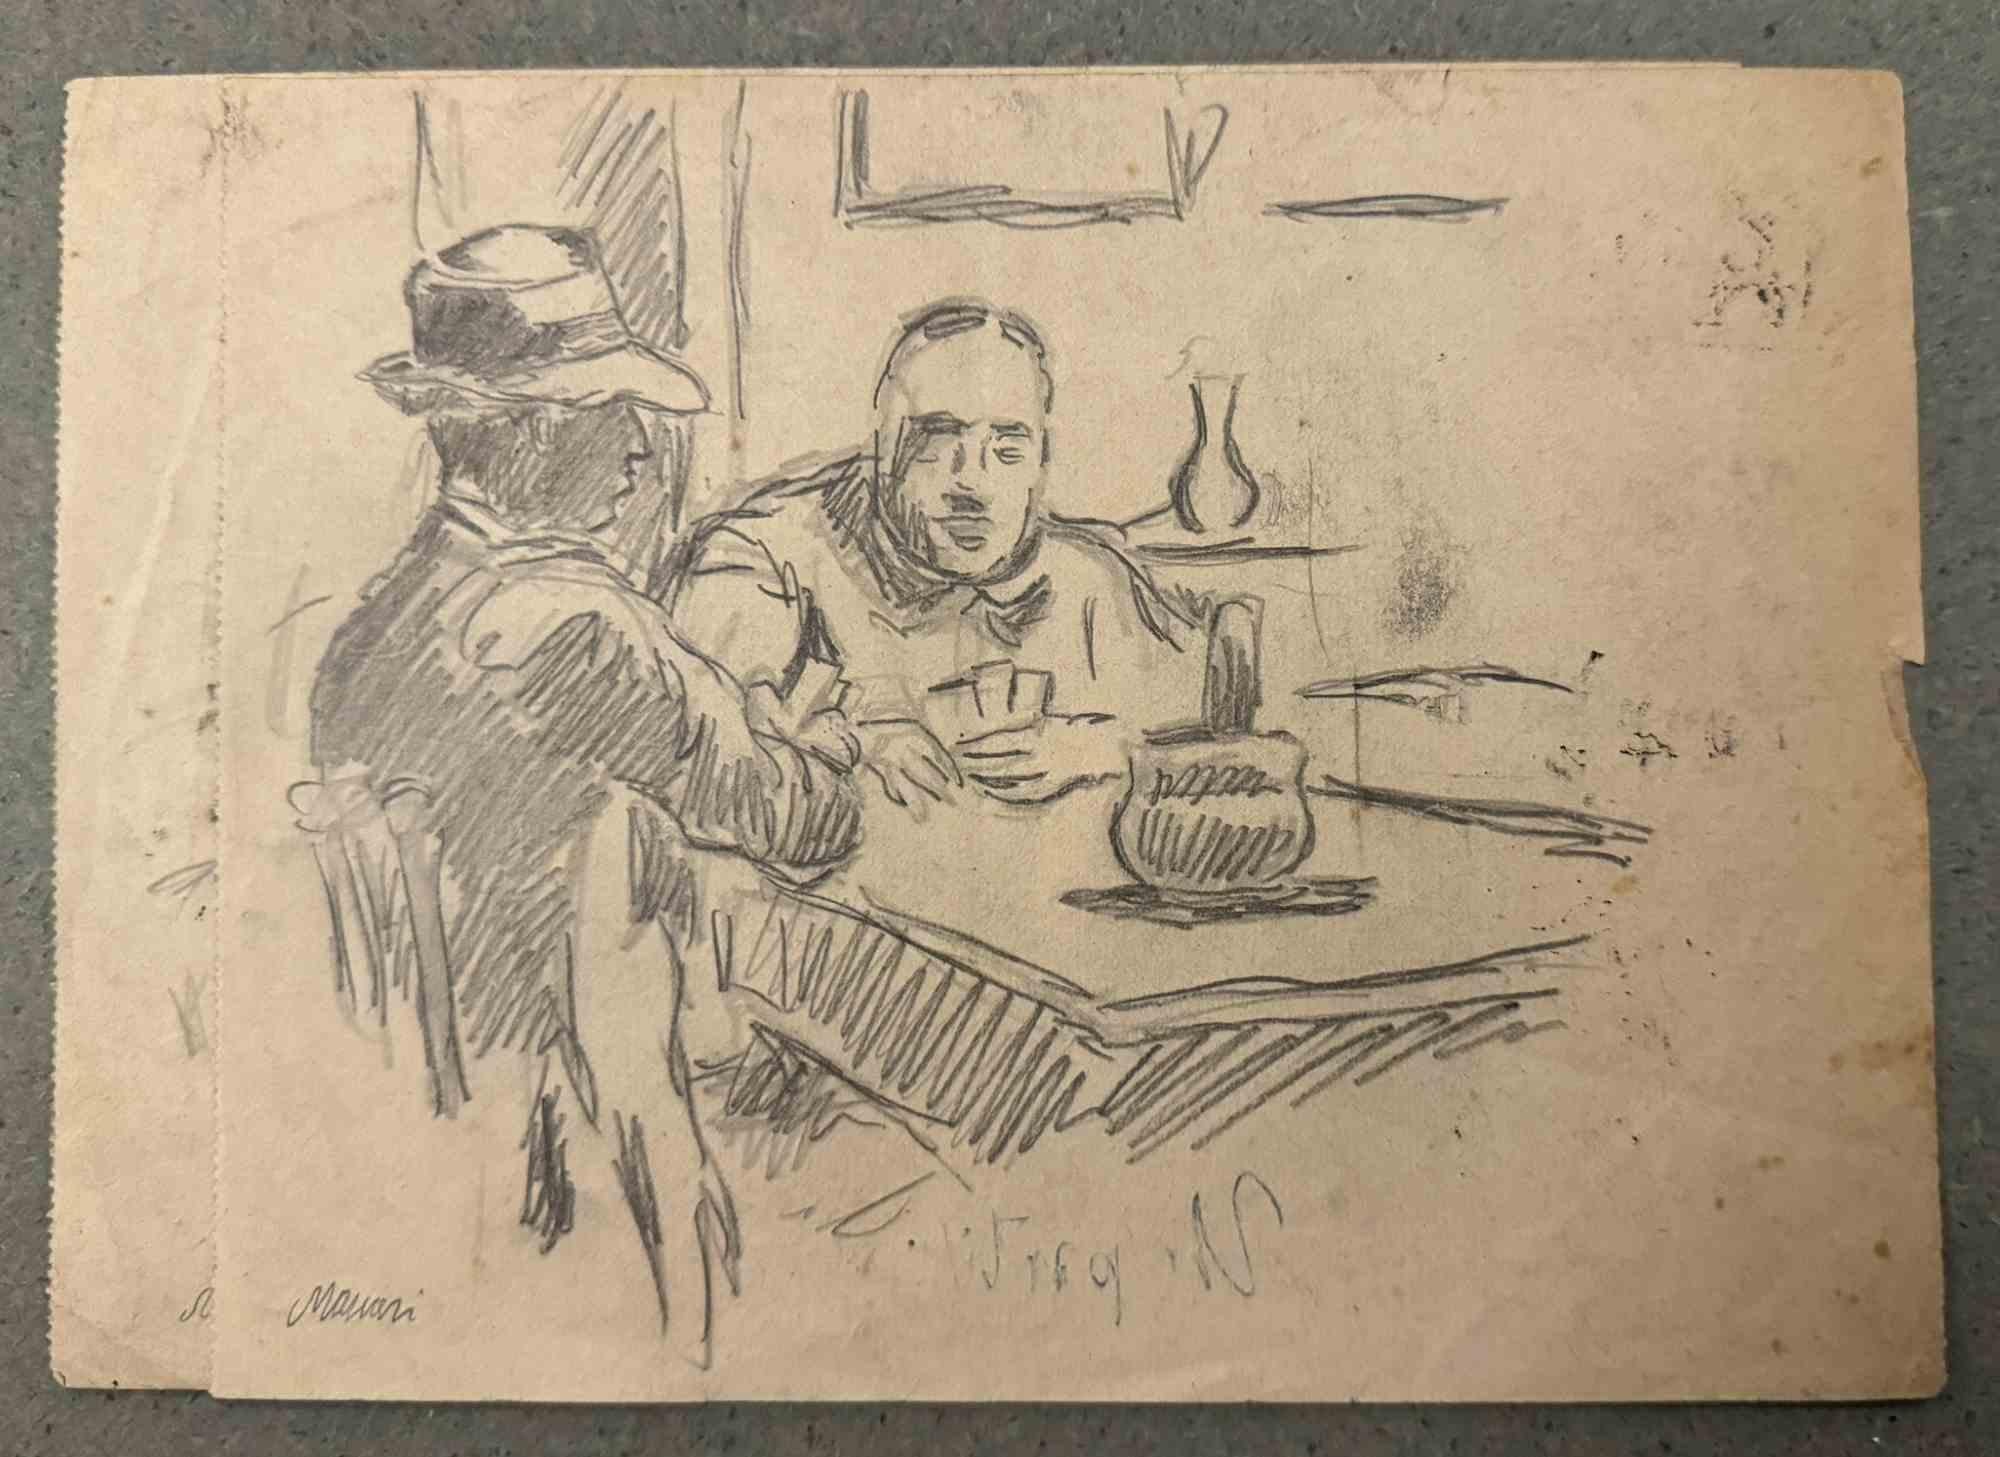 Meeting is a charcoal drawing realized by Mino Maccari  (1924-1989) in the Mid-20th Century.

Hand-signed.

Good conditions with slight foxing.

Mino Maccari (Siena, 1924-Rome, June 16, 1989) was an Italian writer, painter, engraver and journalist,